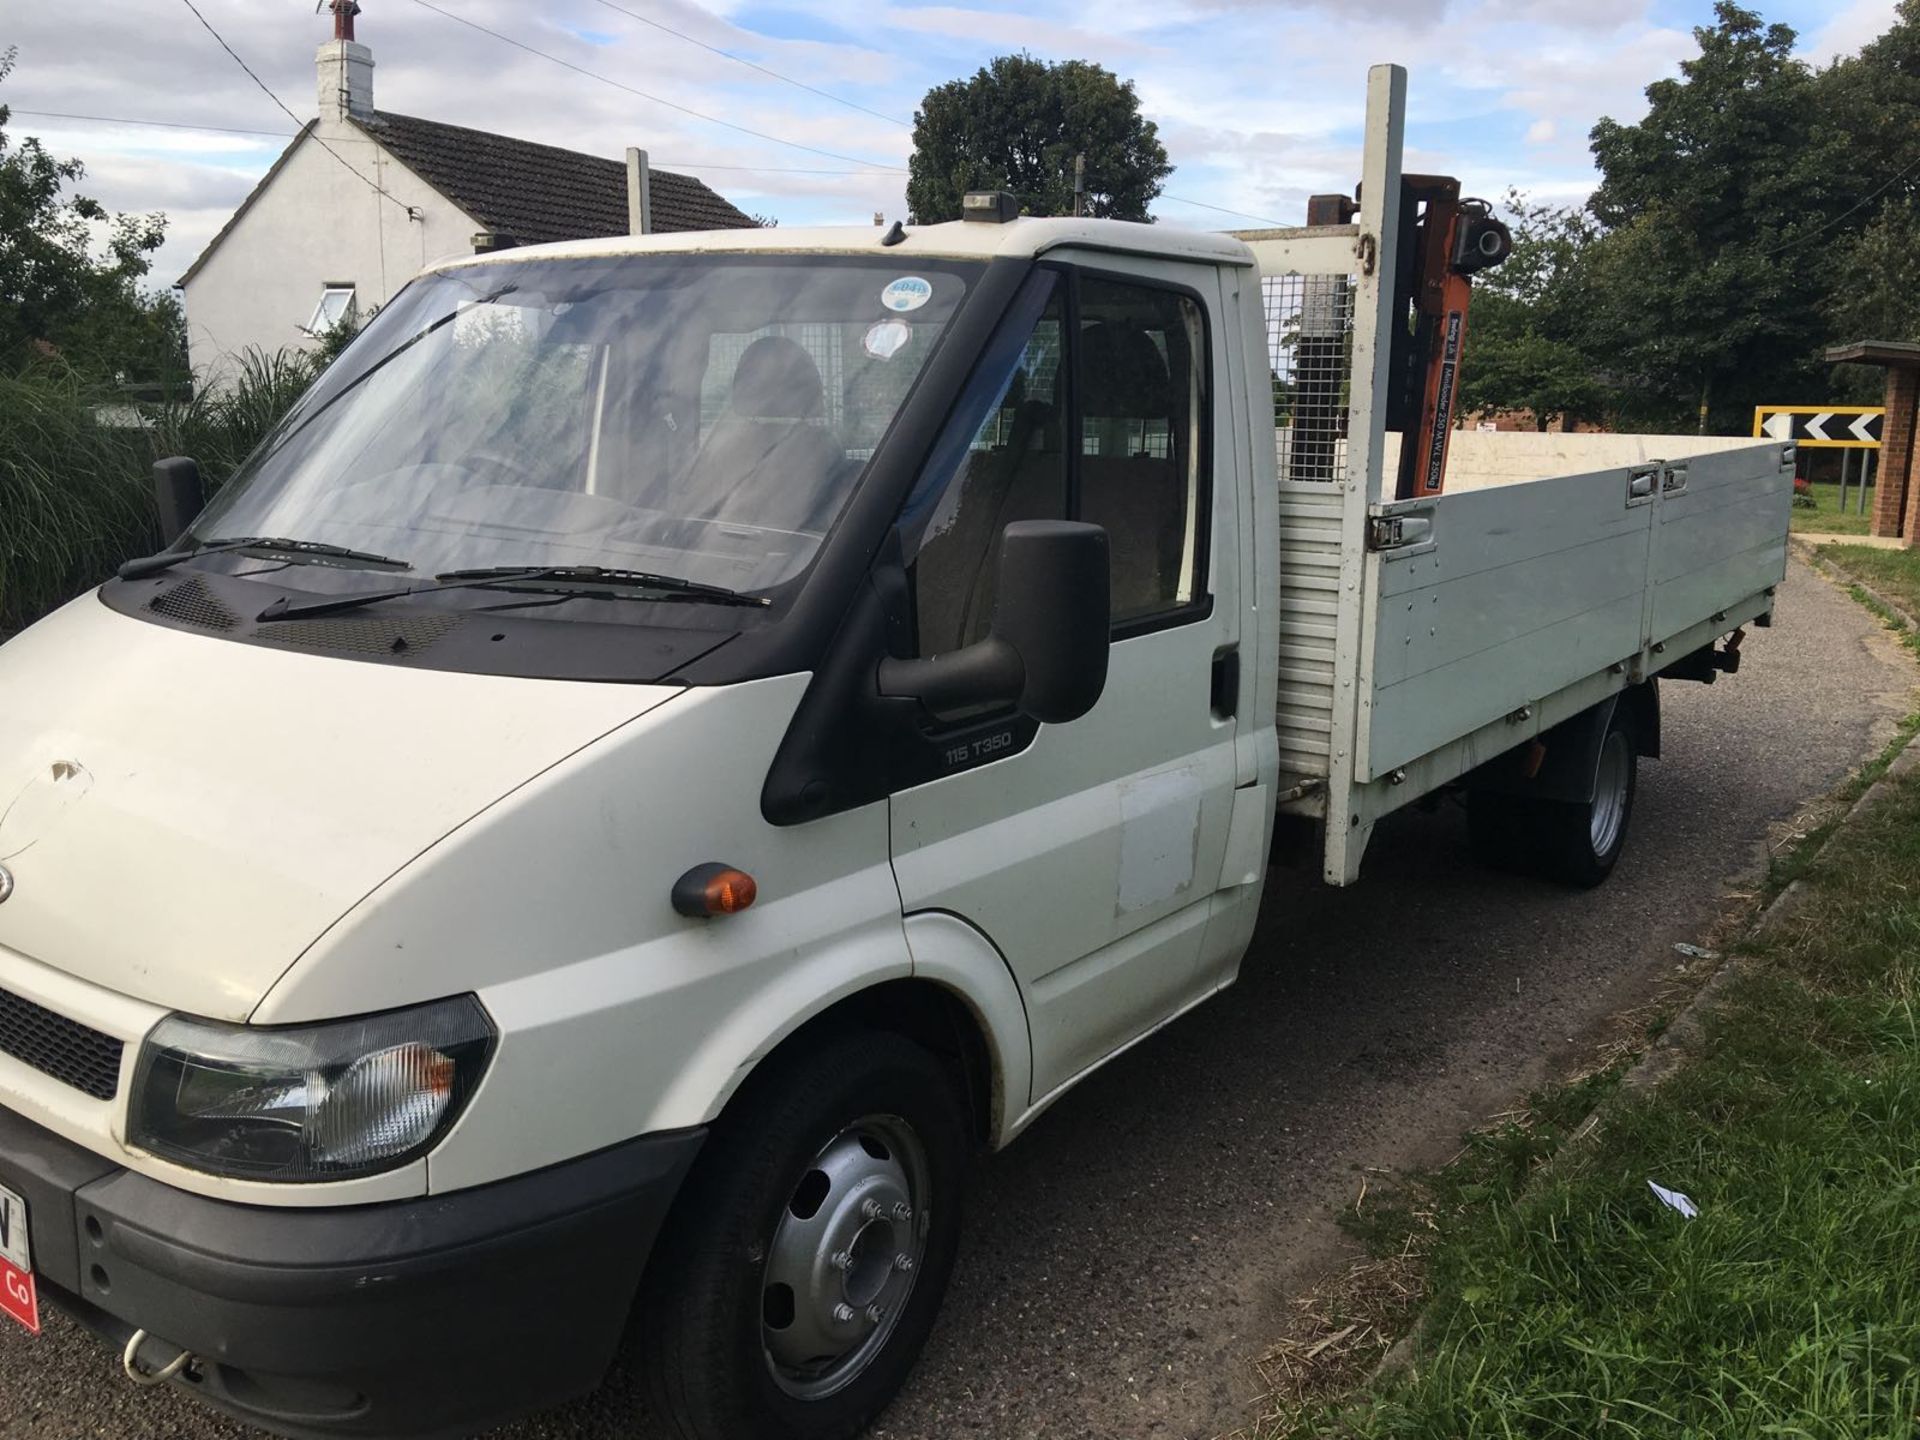 2006 FORD TRANSIT 350 LWB DROPSIDE LORRY - Image 2 of 18